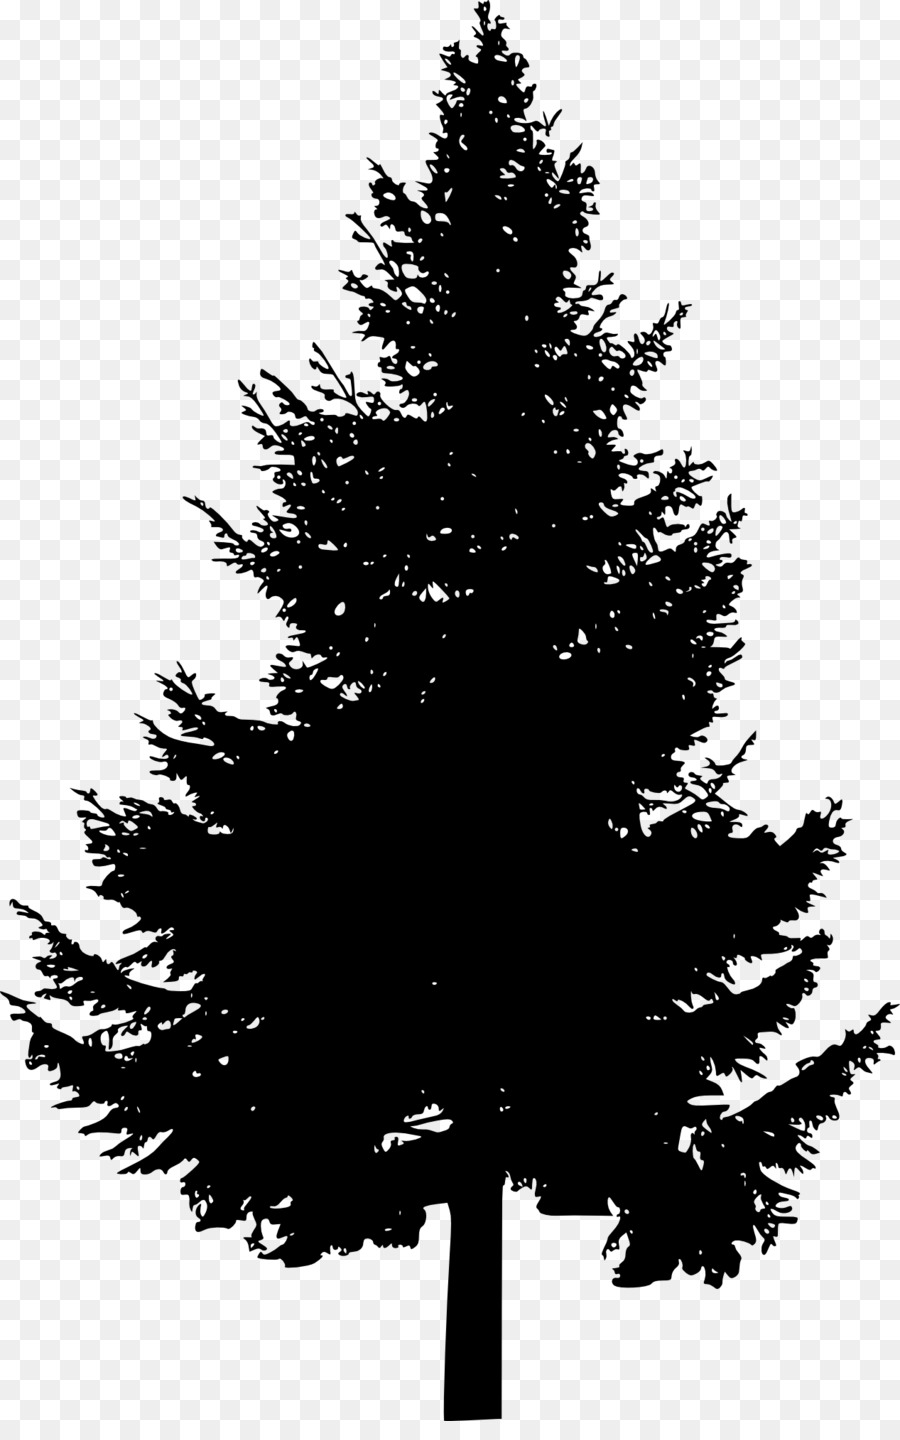 Pine Tree Silhouette Clip art - pine tree png download - 1267*2000 - Free Transparent Pine png Download.